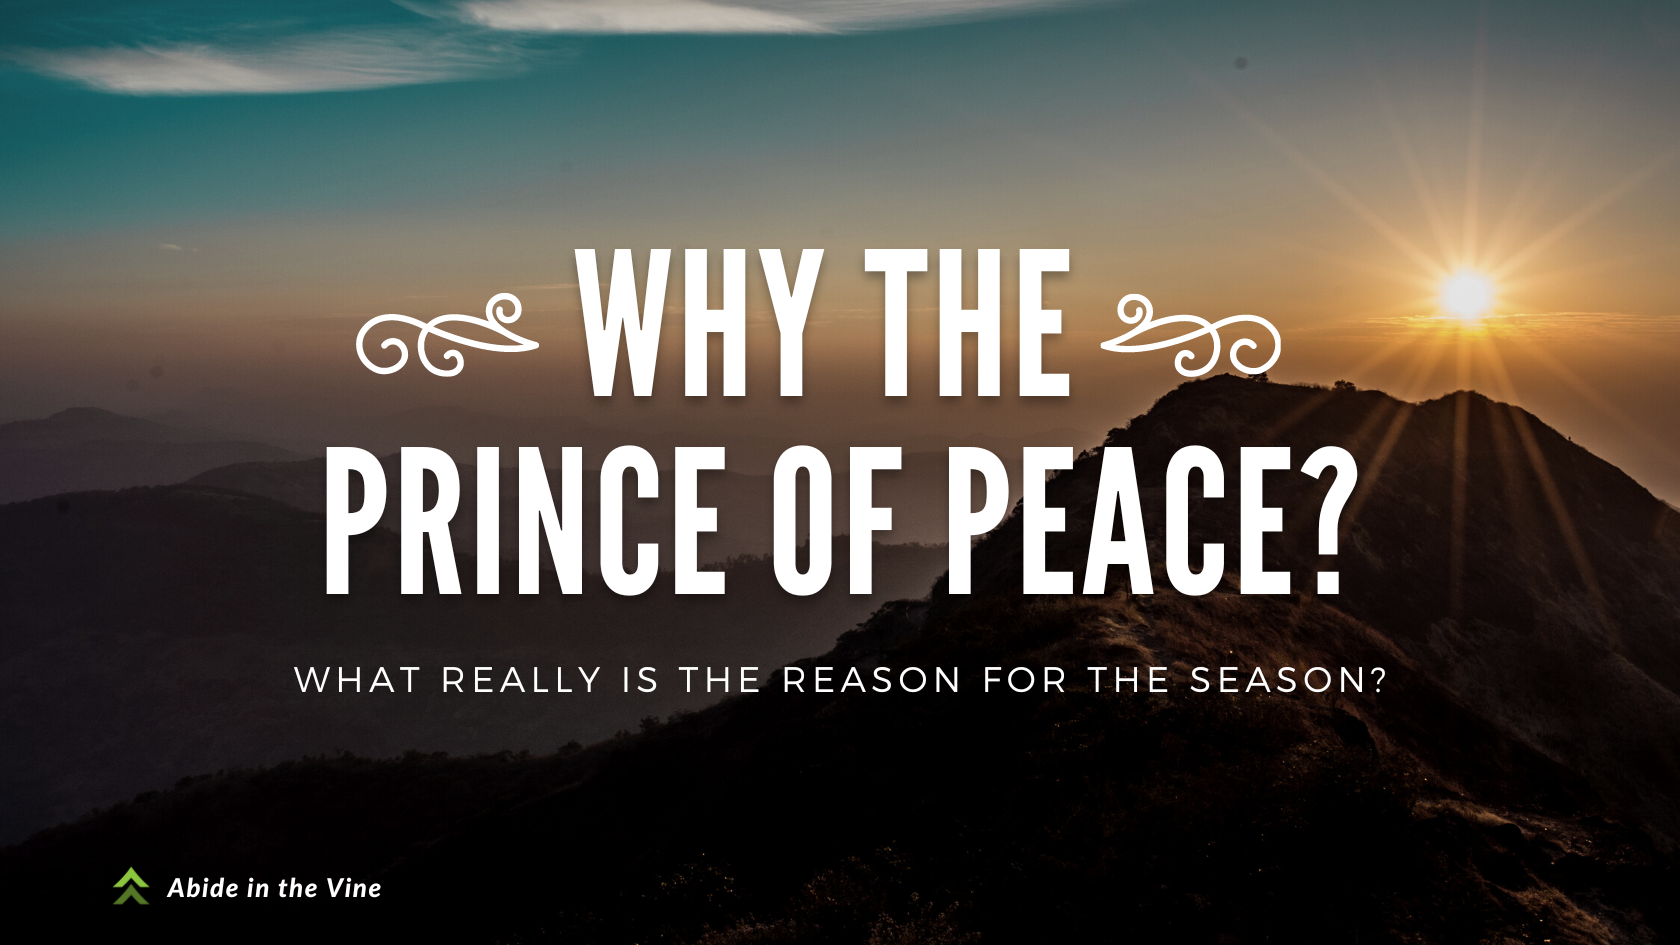 Why the Prince of Peace